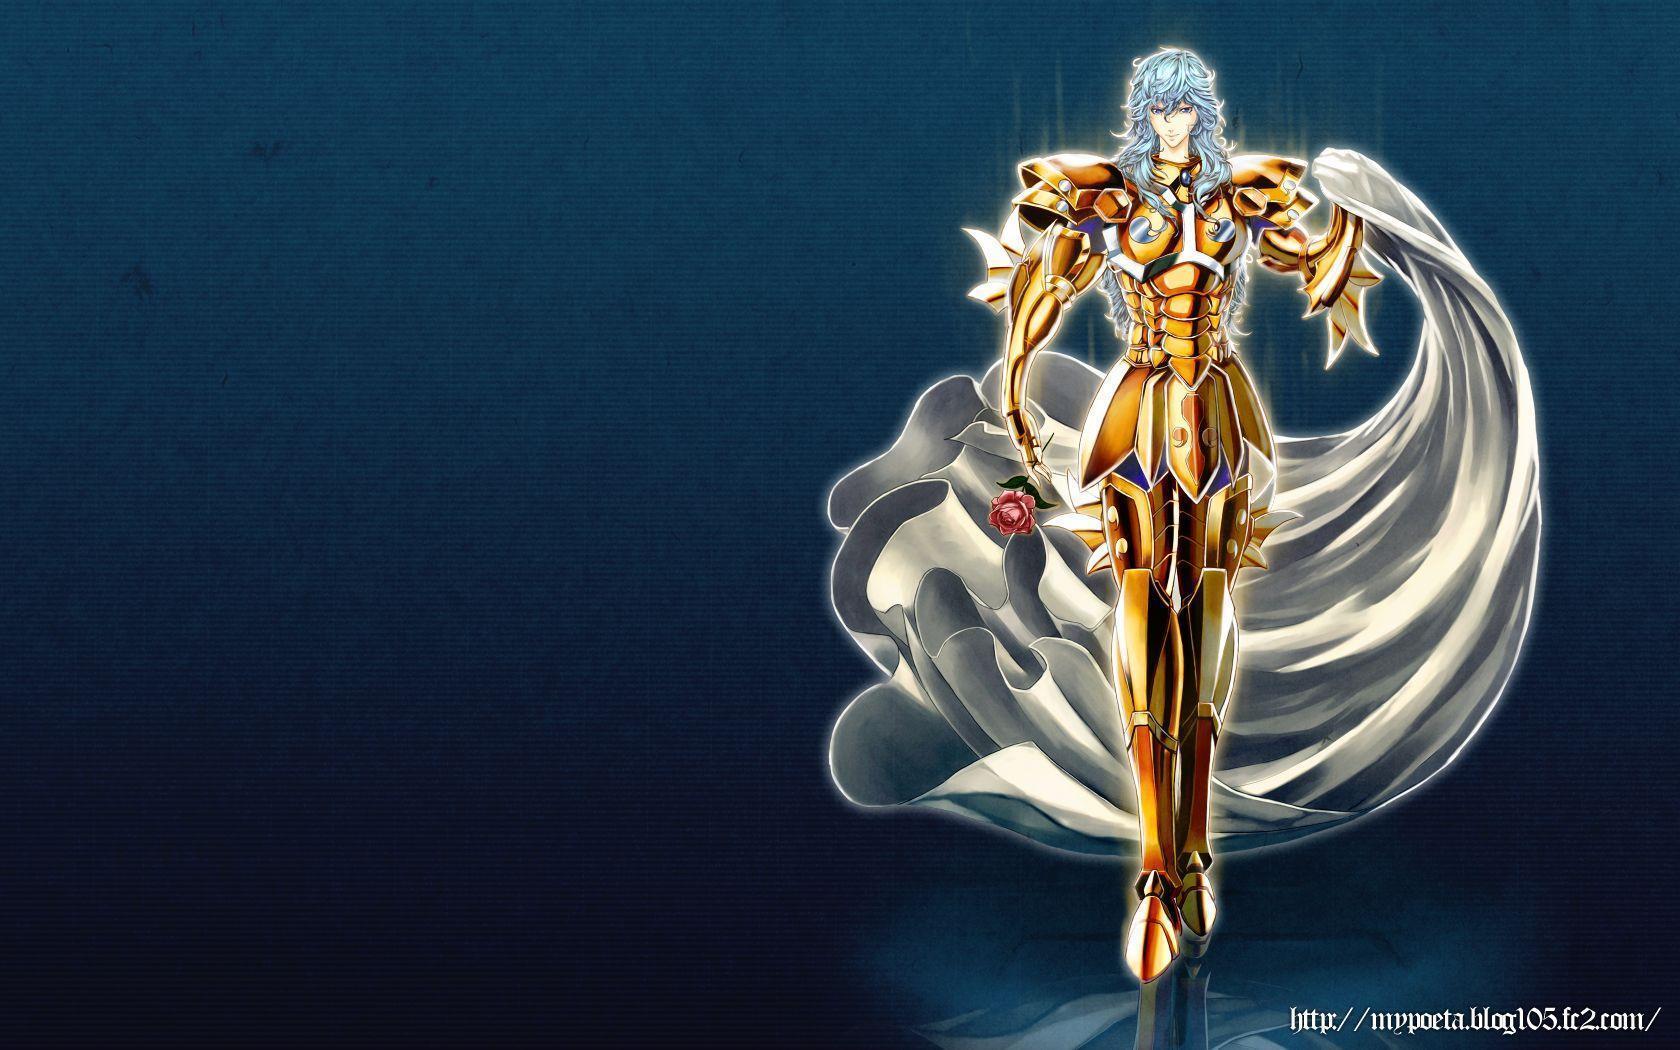 Knights of the Zodiac. Free Anime Wallpaper Site